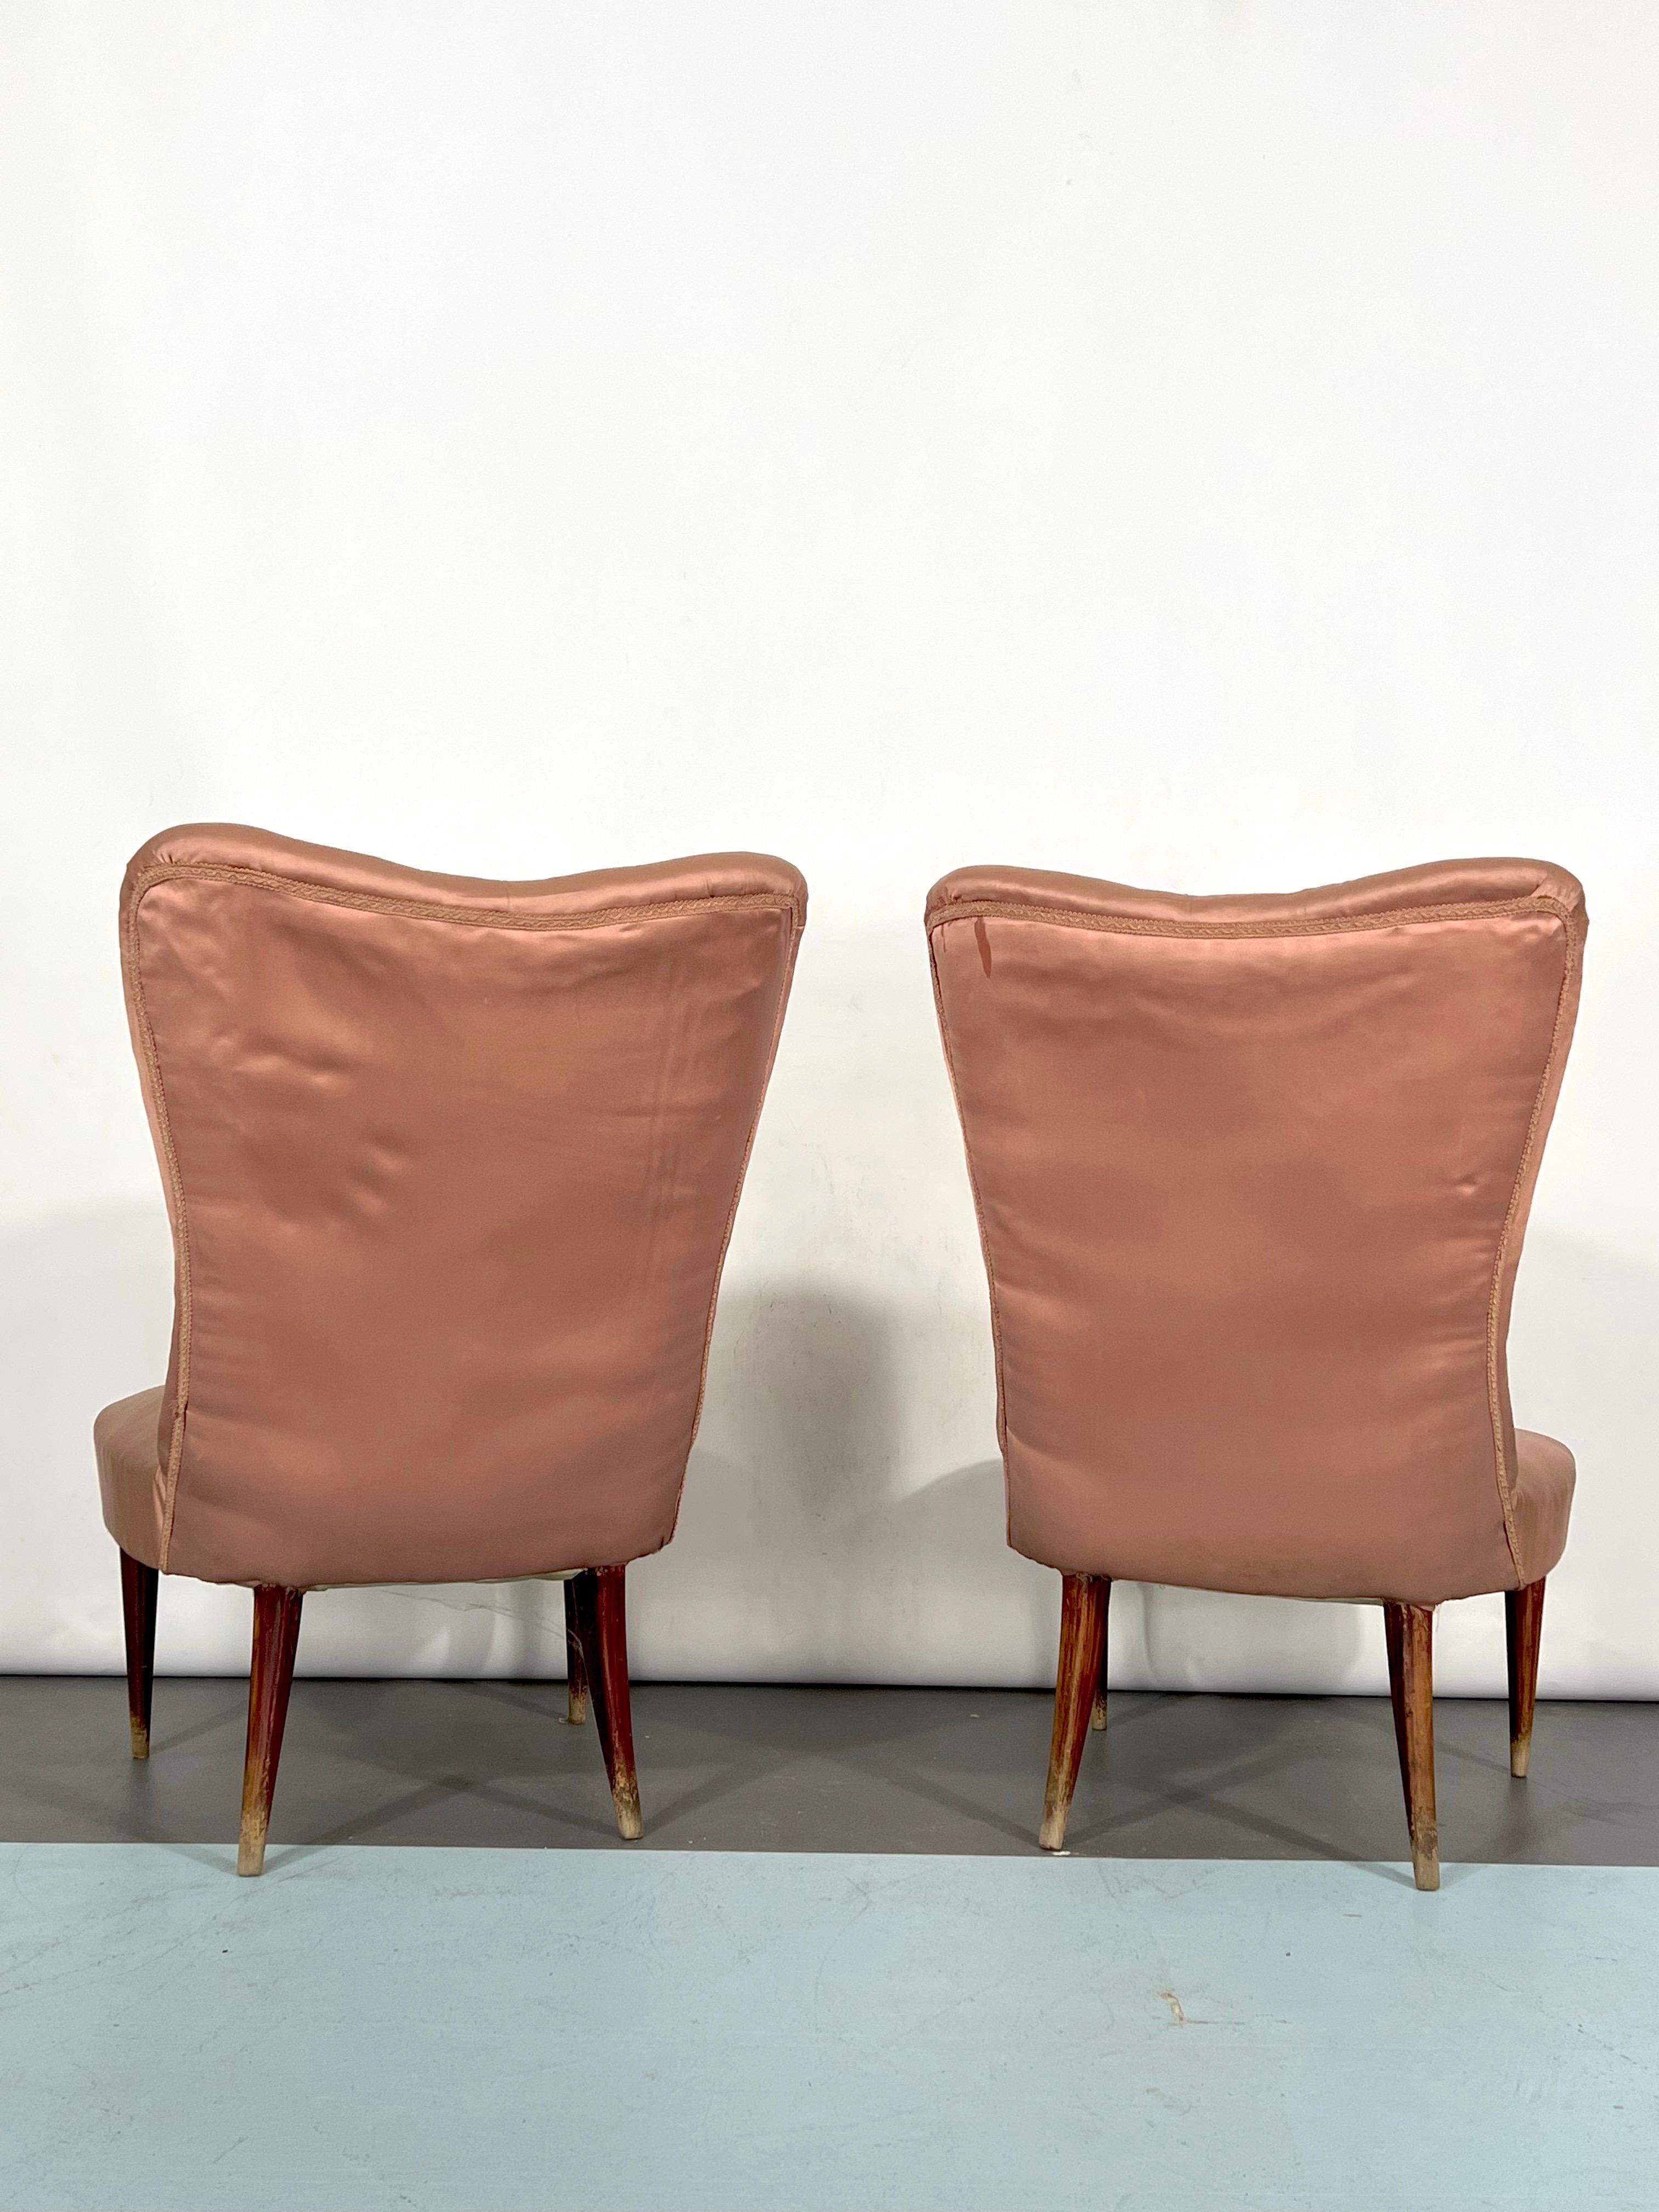 Italian Vintage Pair of Club Armchairs in the Manner of Gio Ponti, 1950s For Sale 6